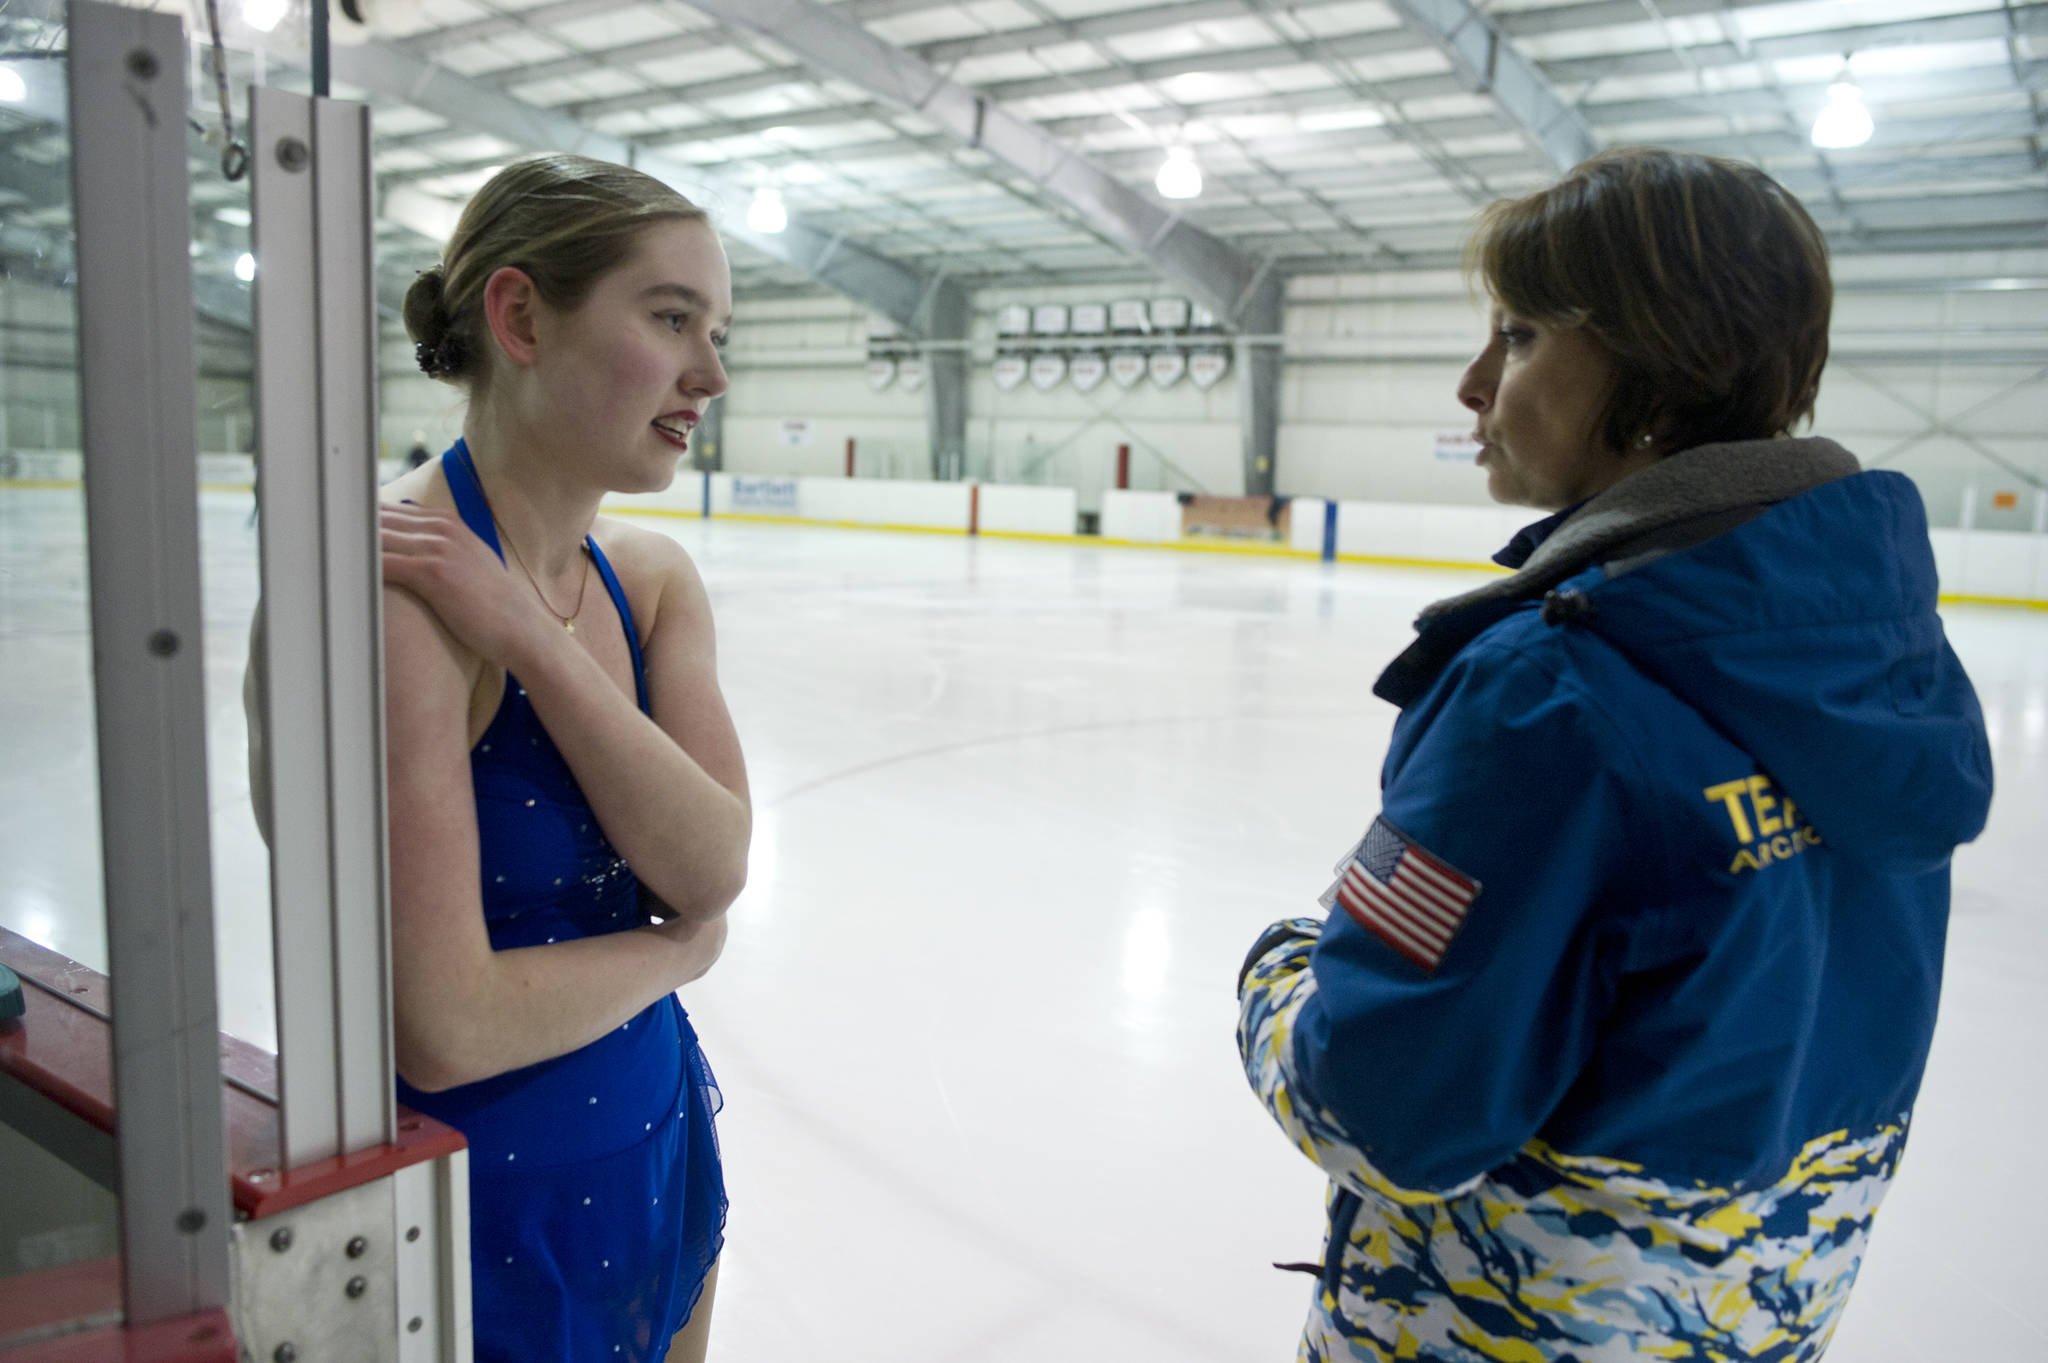 Laurie Balstad, a member of the Juneau Skating Club, speaks with her coach, Pam Leary, during practice at Treadwell Arena on Friday, March 3, 2017. (Michael Penn | Juneau Empire)